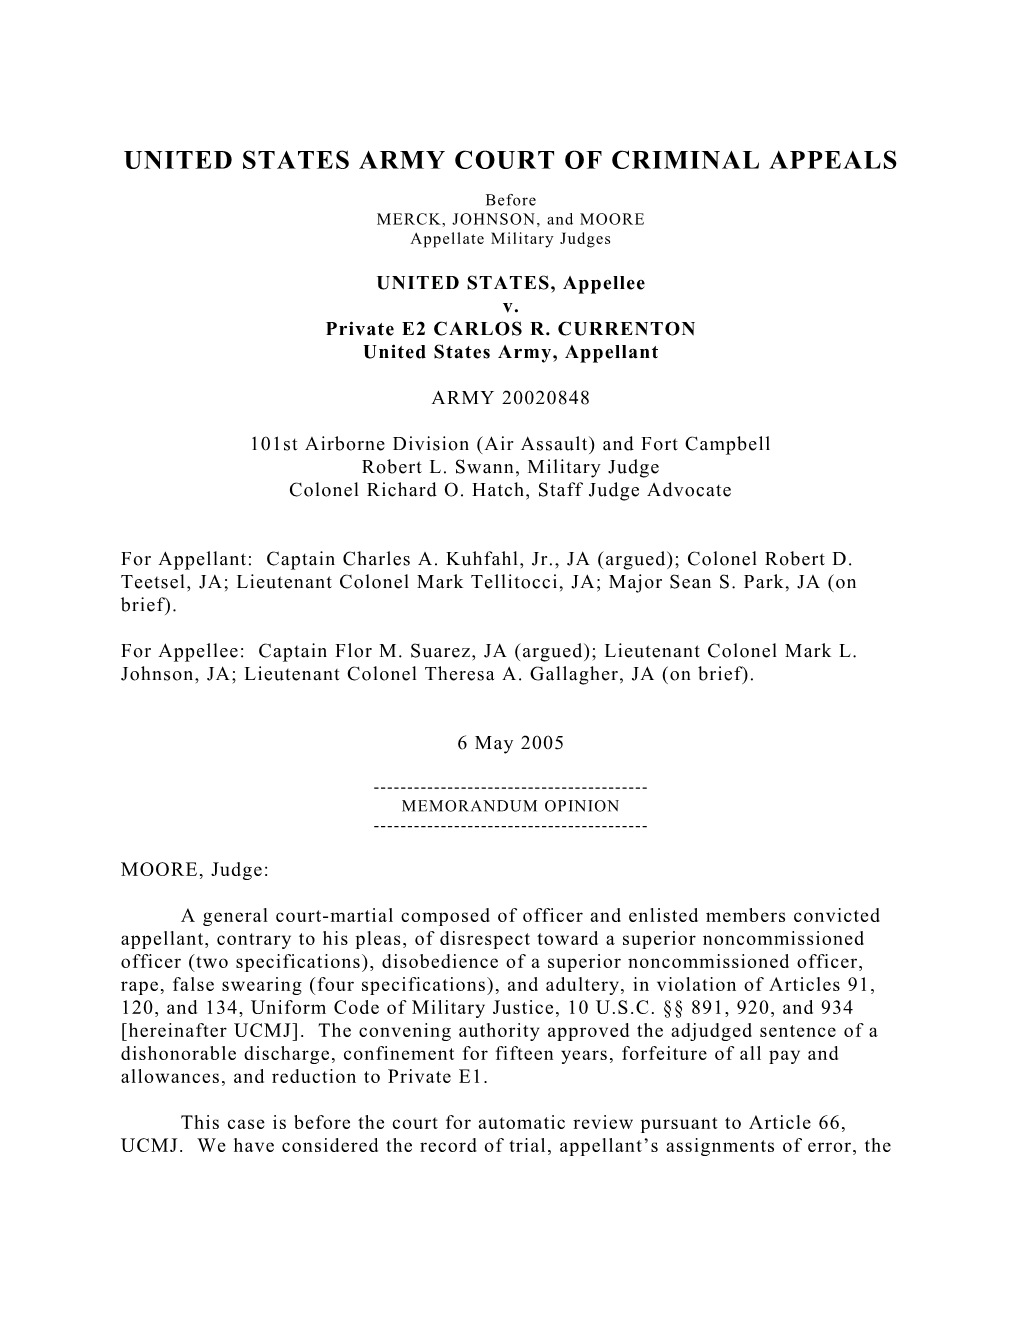 United States Army Court of Criminal Appeals s3